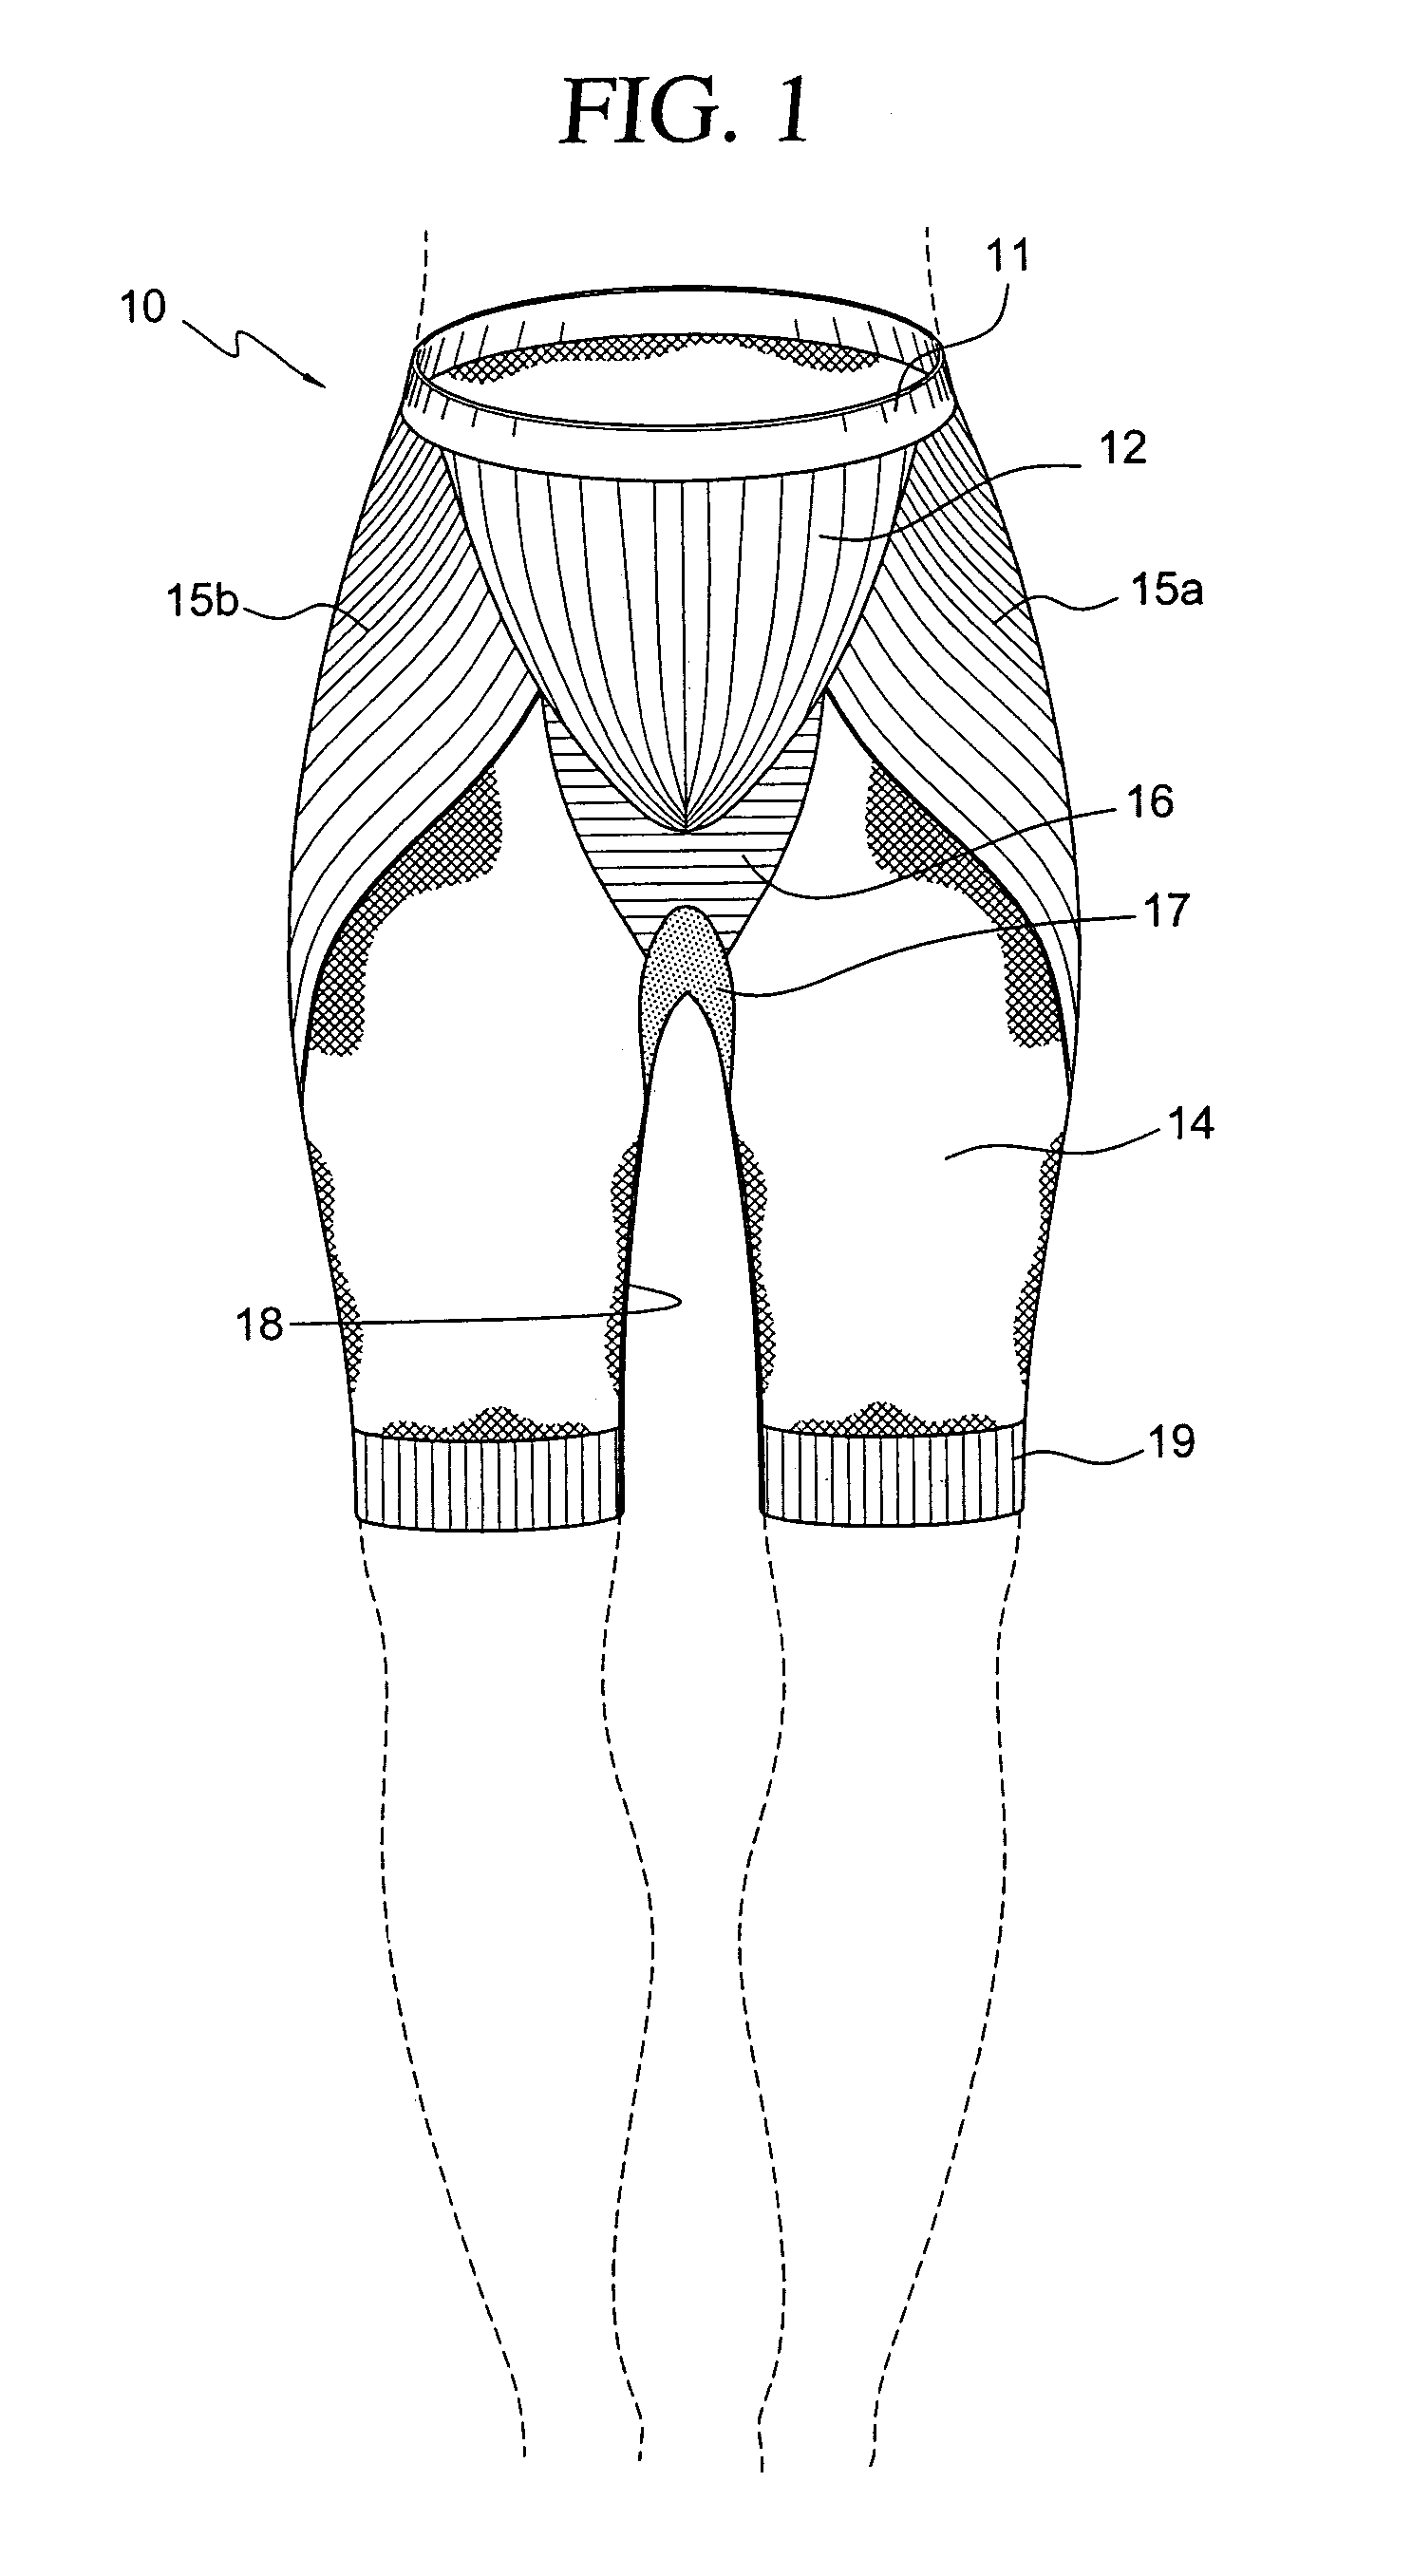 Circularly knit undergarment having knit-in support panels and derriere cup fullness